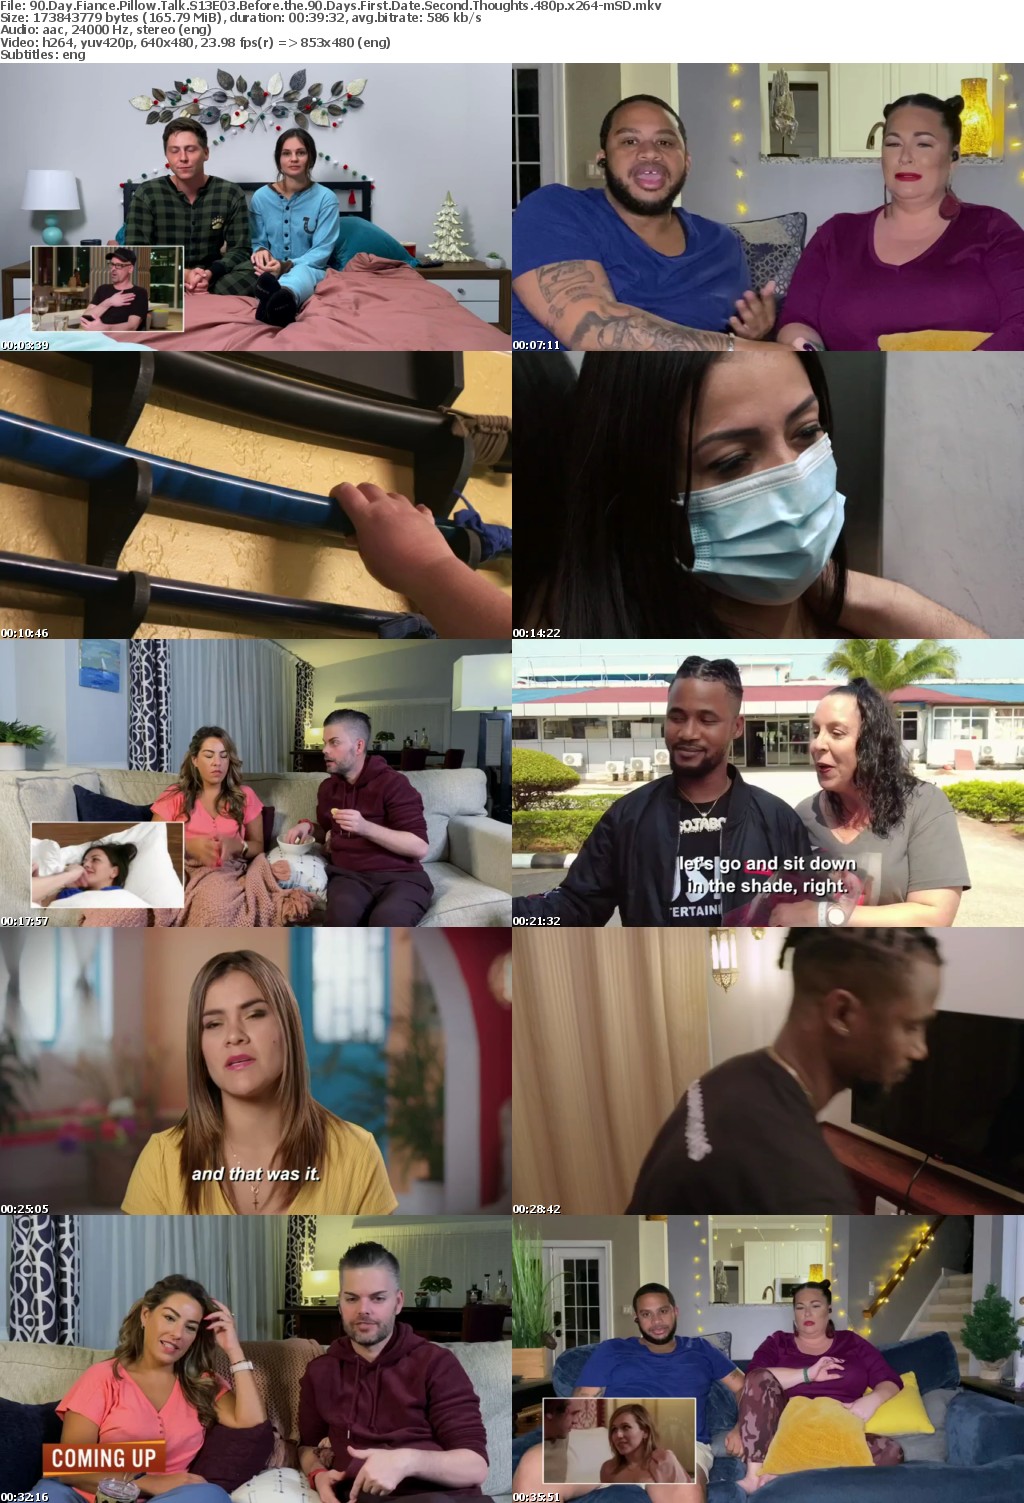 90 Day Fiance Pillow Talk S13E03 Before the 90 Days First Date Second Thoughts 480p x264-mSD